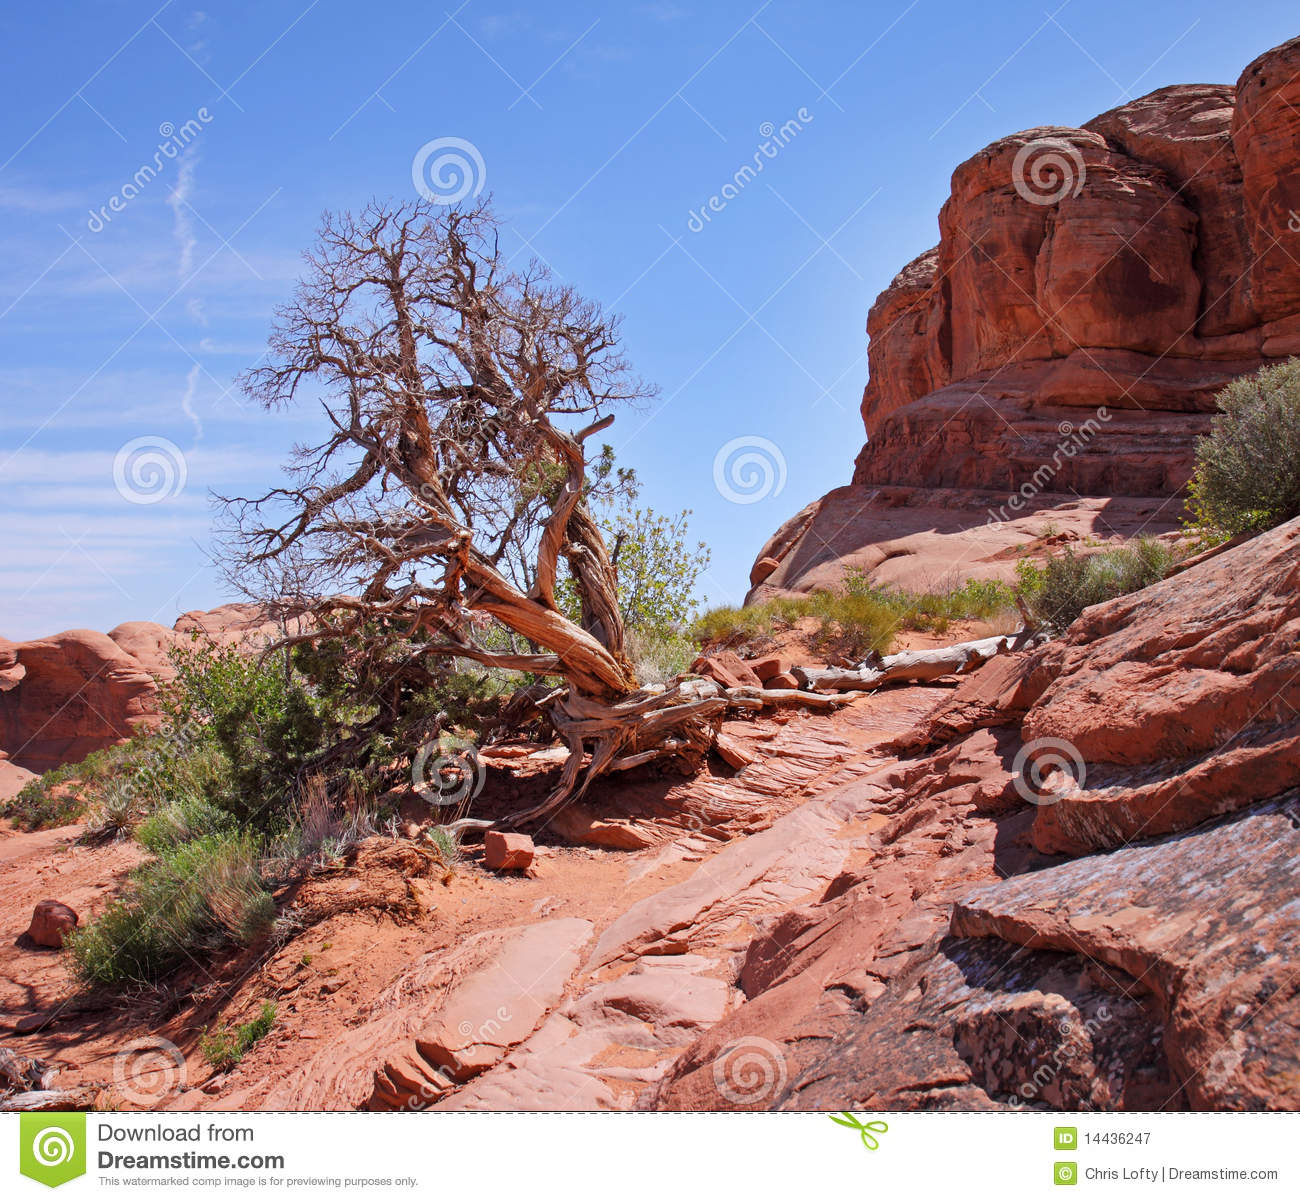 Canyon Landscape In The Usa Royalty Free Stock Photography   Image